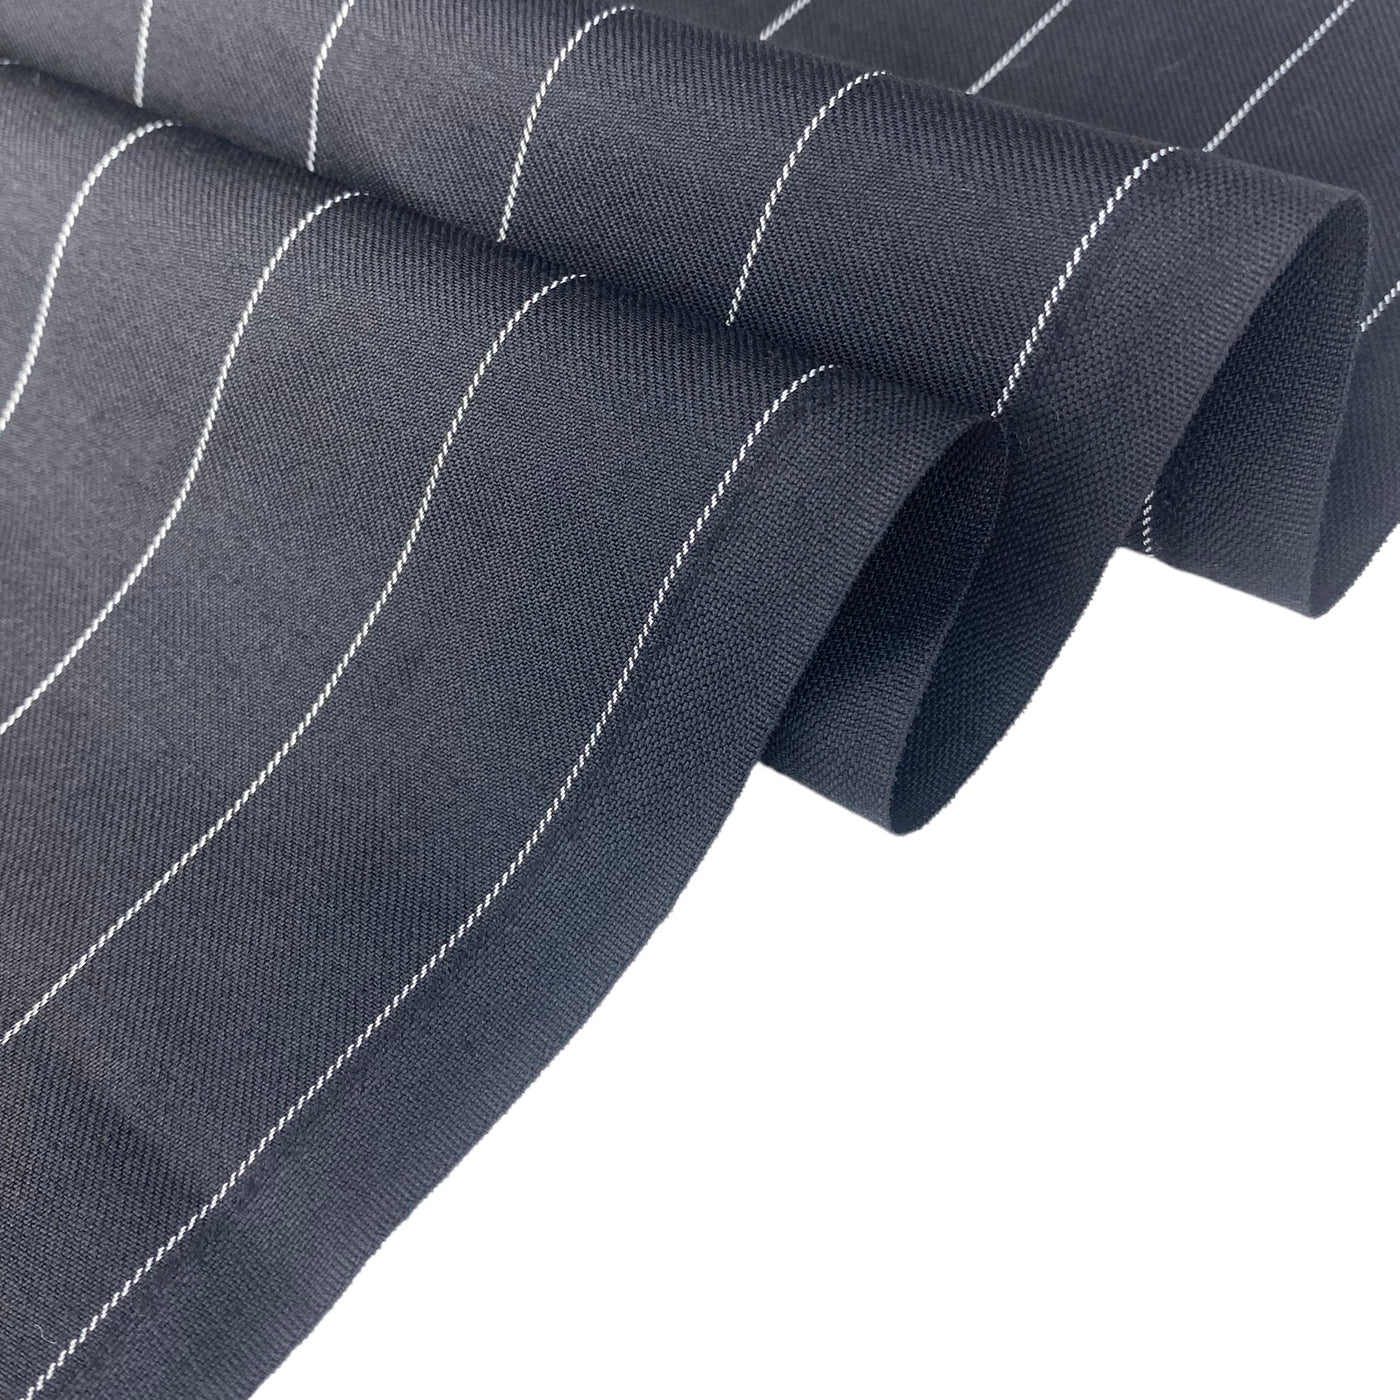 Striped Wool Suiting - Black/White